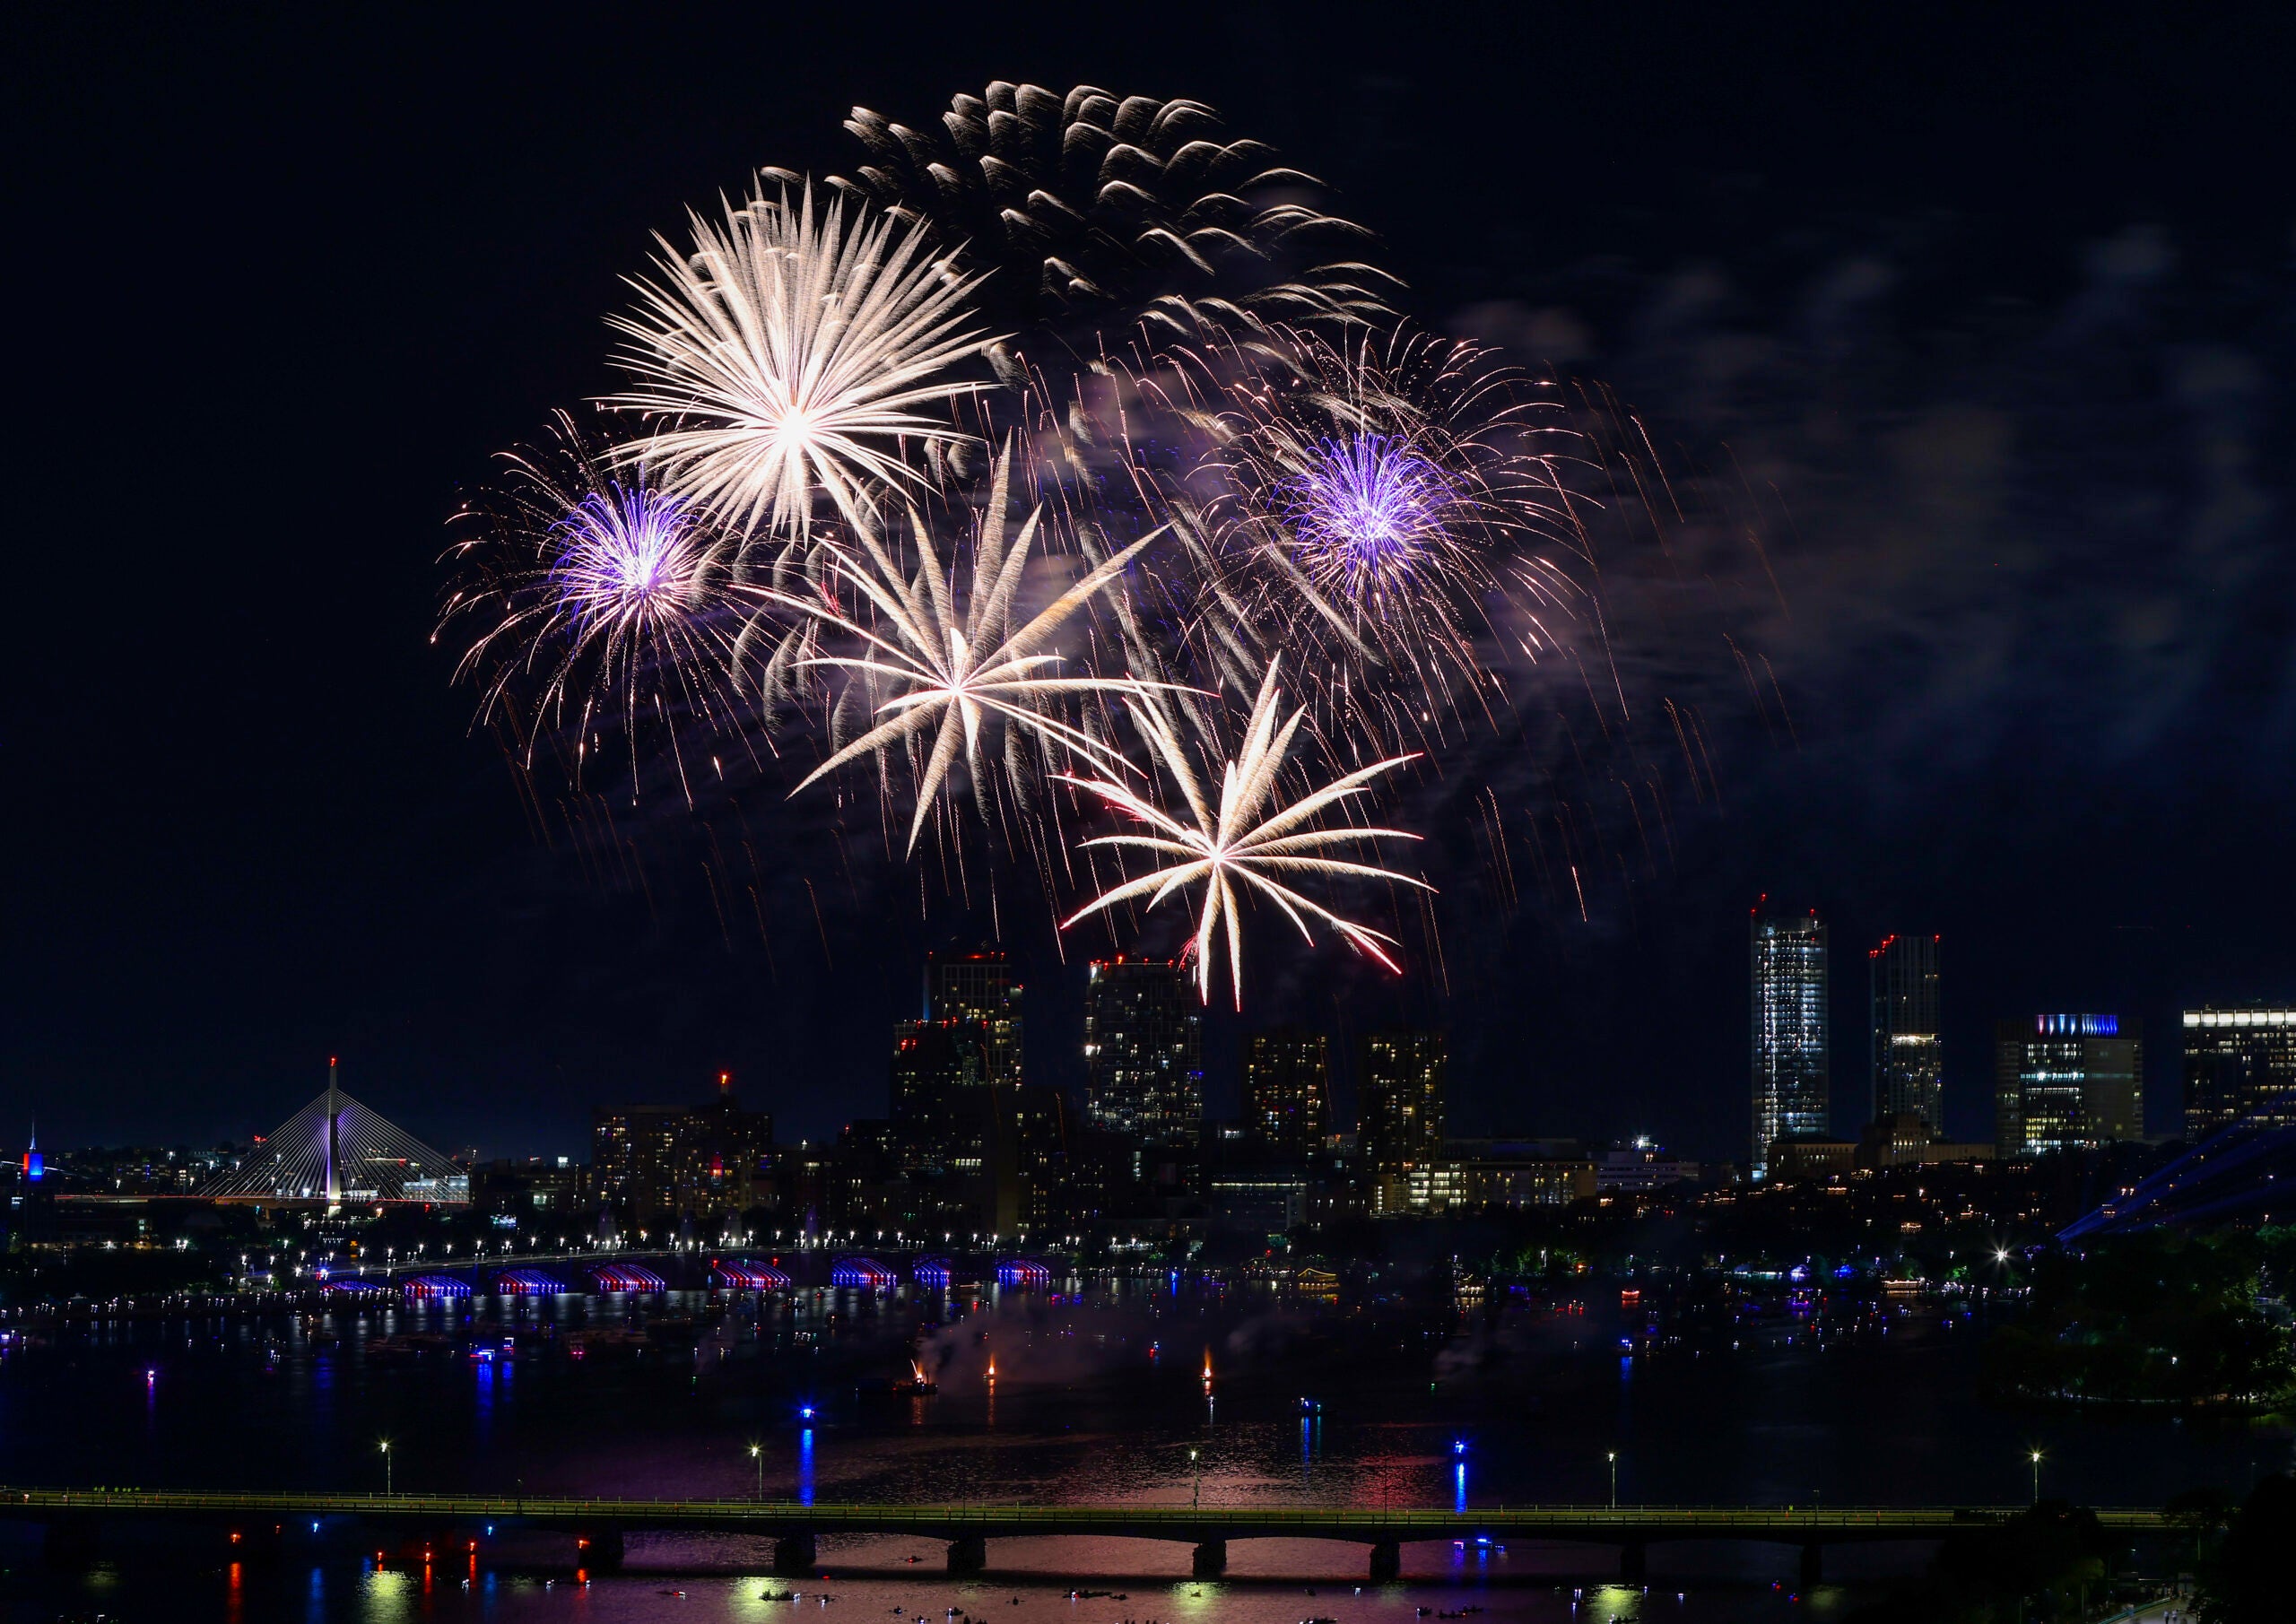 A photo scroll of Boston's Fourth of July fireworks show